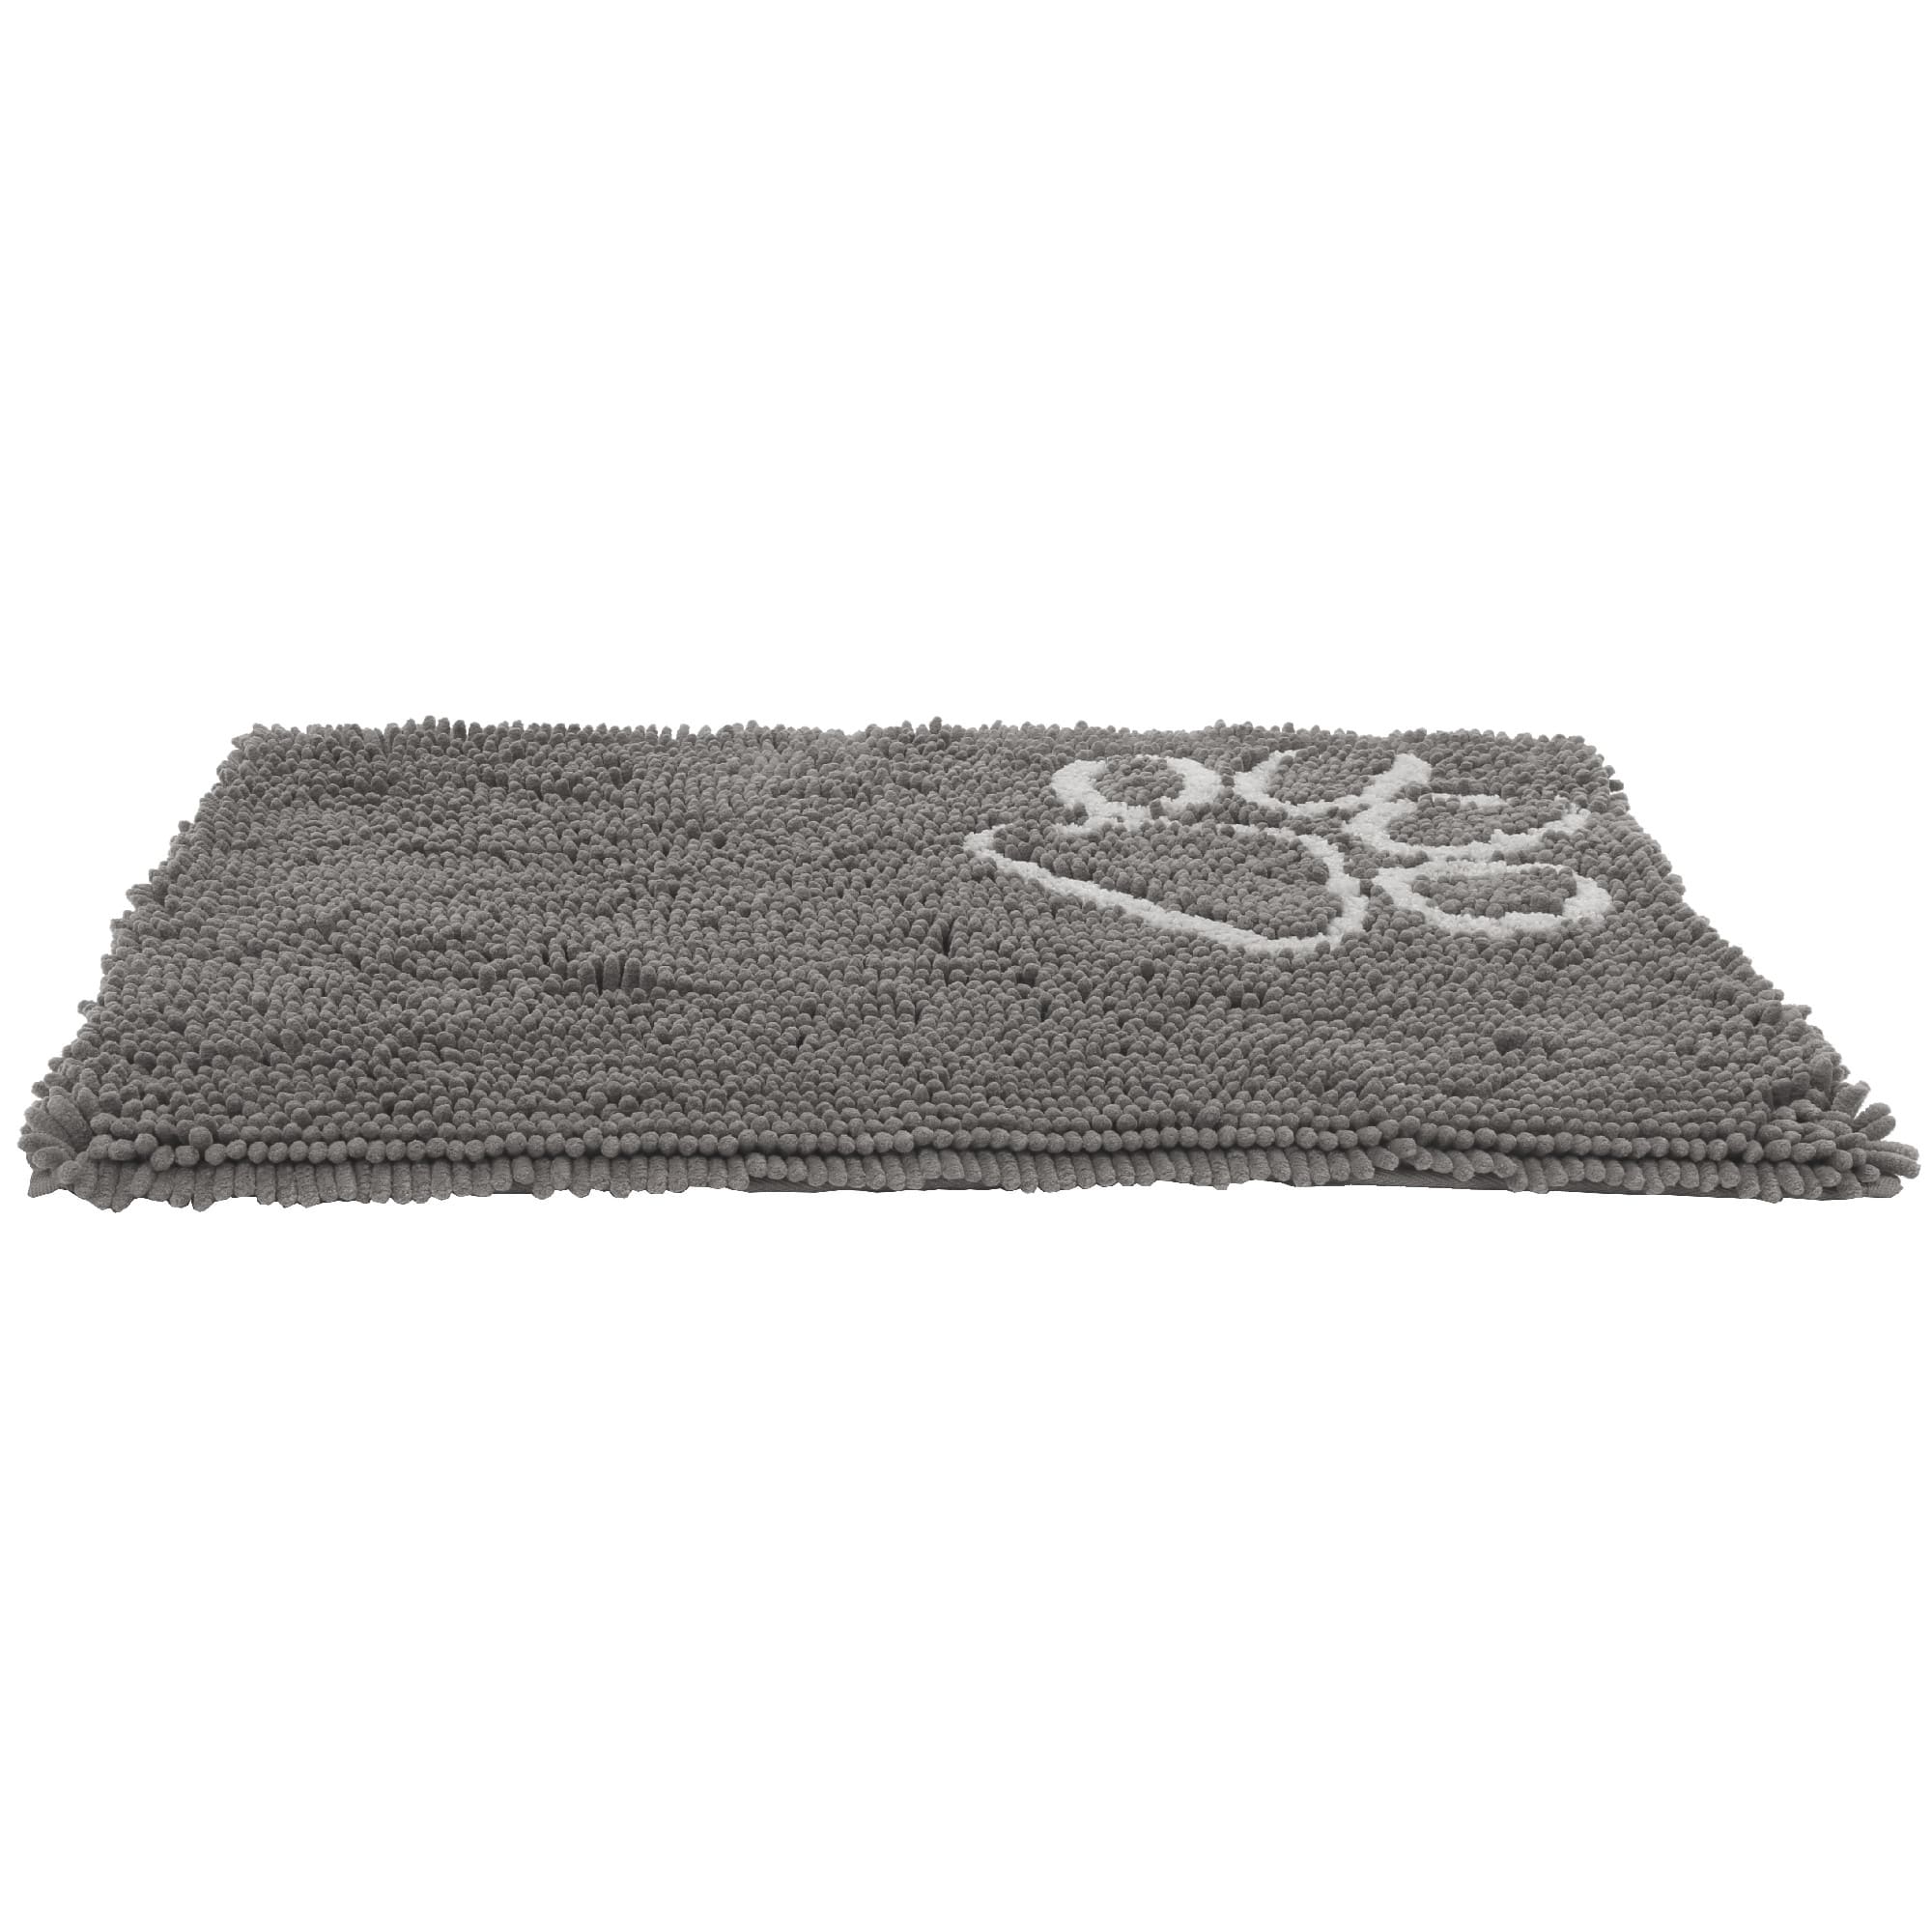 Dundee Deco Paws Pet Mat Grey Black - 39 x 24, Waterproof Non-Slip Quick  Dry Rug Non-Absorbent Dirt Resistant Feeding Mat for Cats and Dogs 